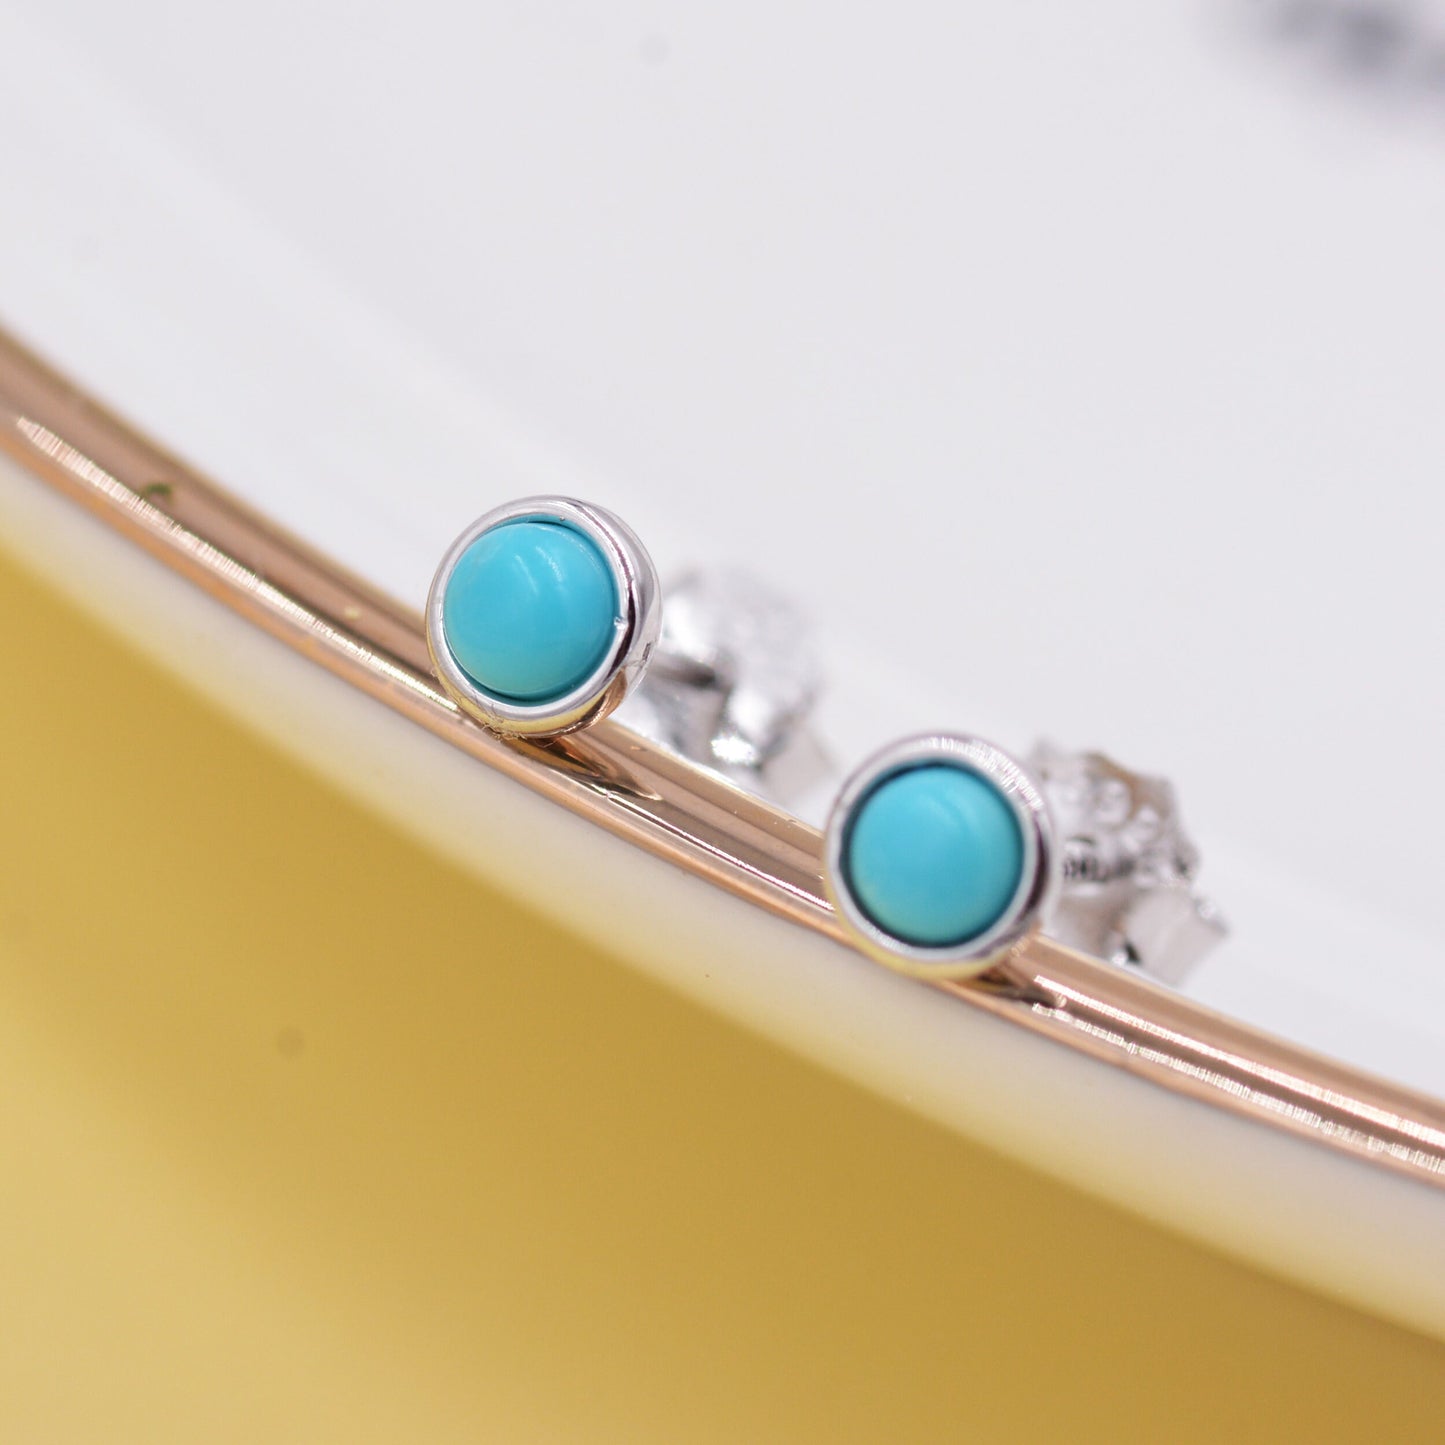 Sterling Silver Small Turquoise Stone Stud Earrings,  4mm Genuine Turquoise Stone, Semi-precious Jewellery